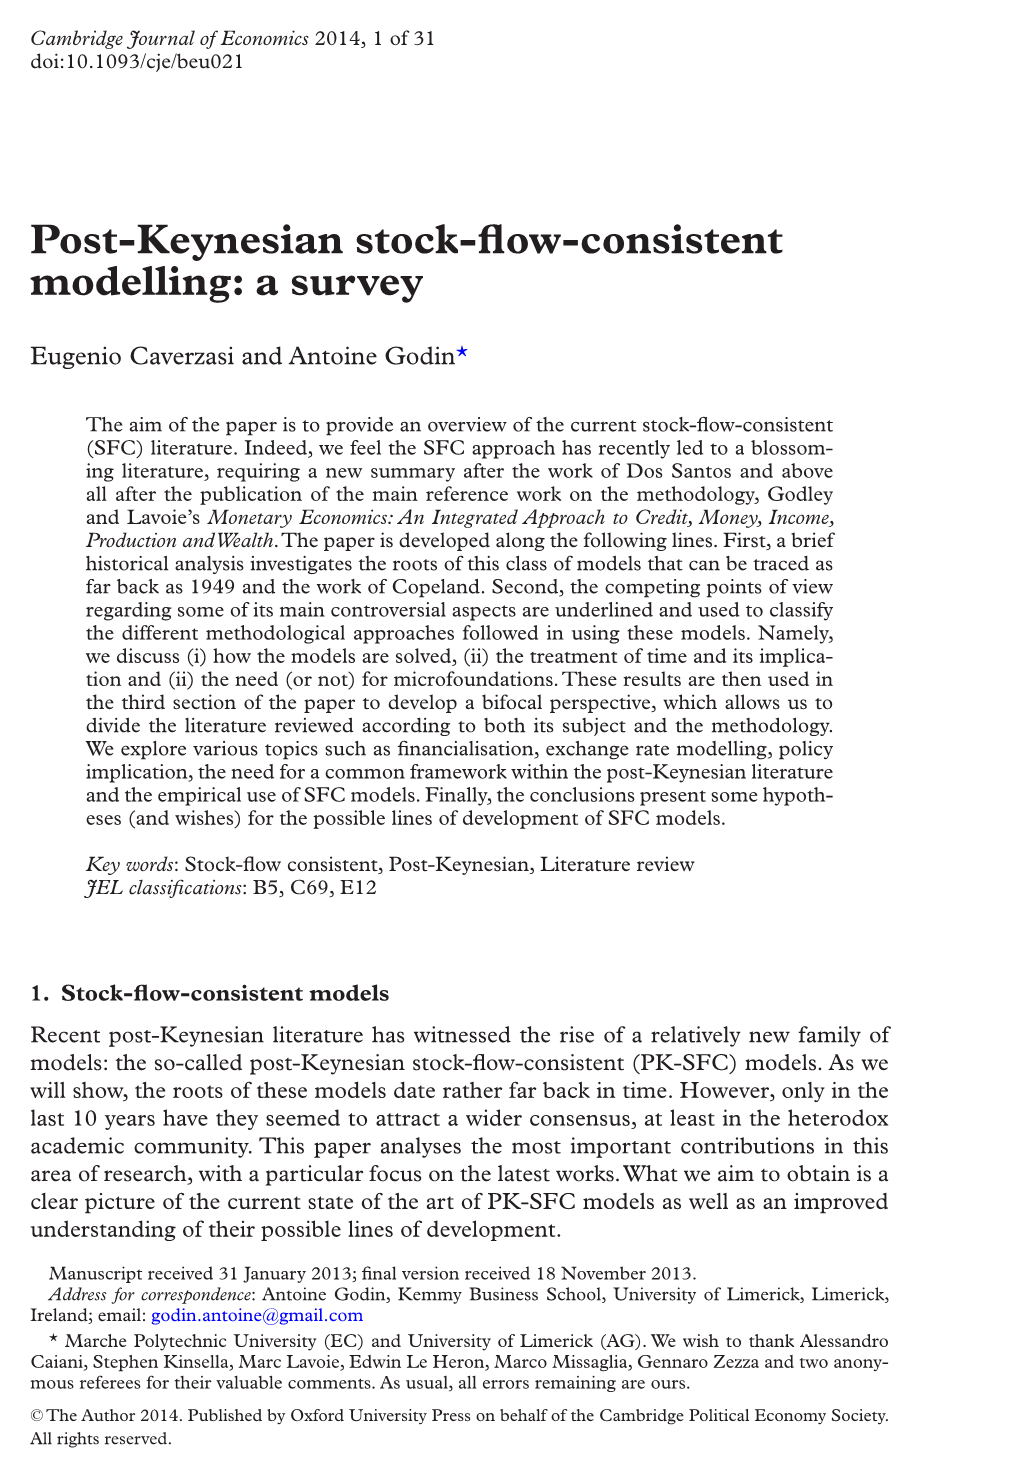 Post-Keynesian Stock-Flow-Consistent Modelling: a Survey Downloaded from Eugenio Caverzasi and Antoine Godin*